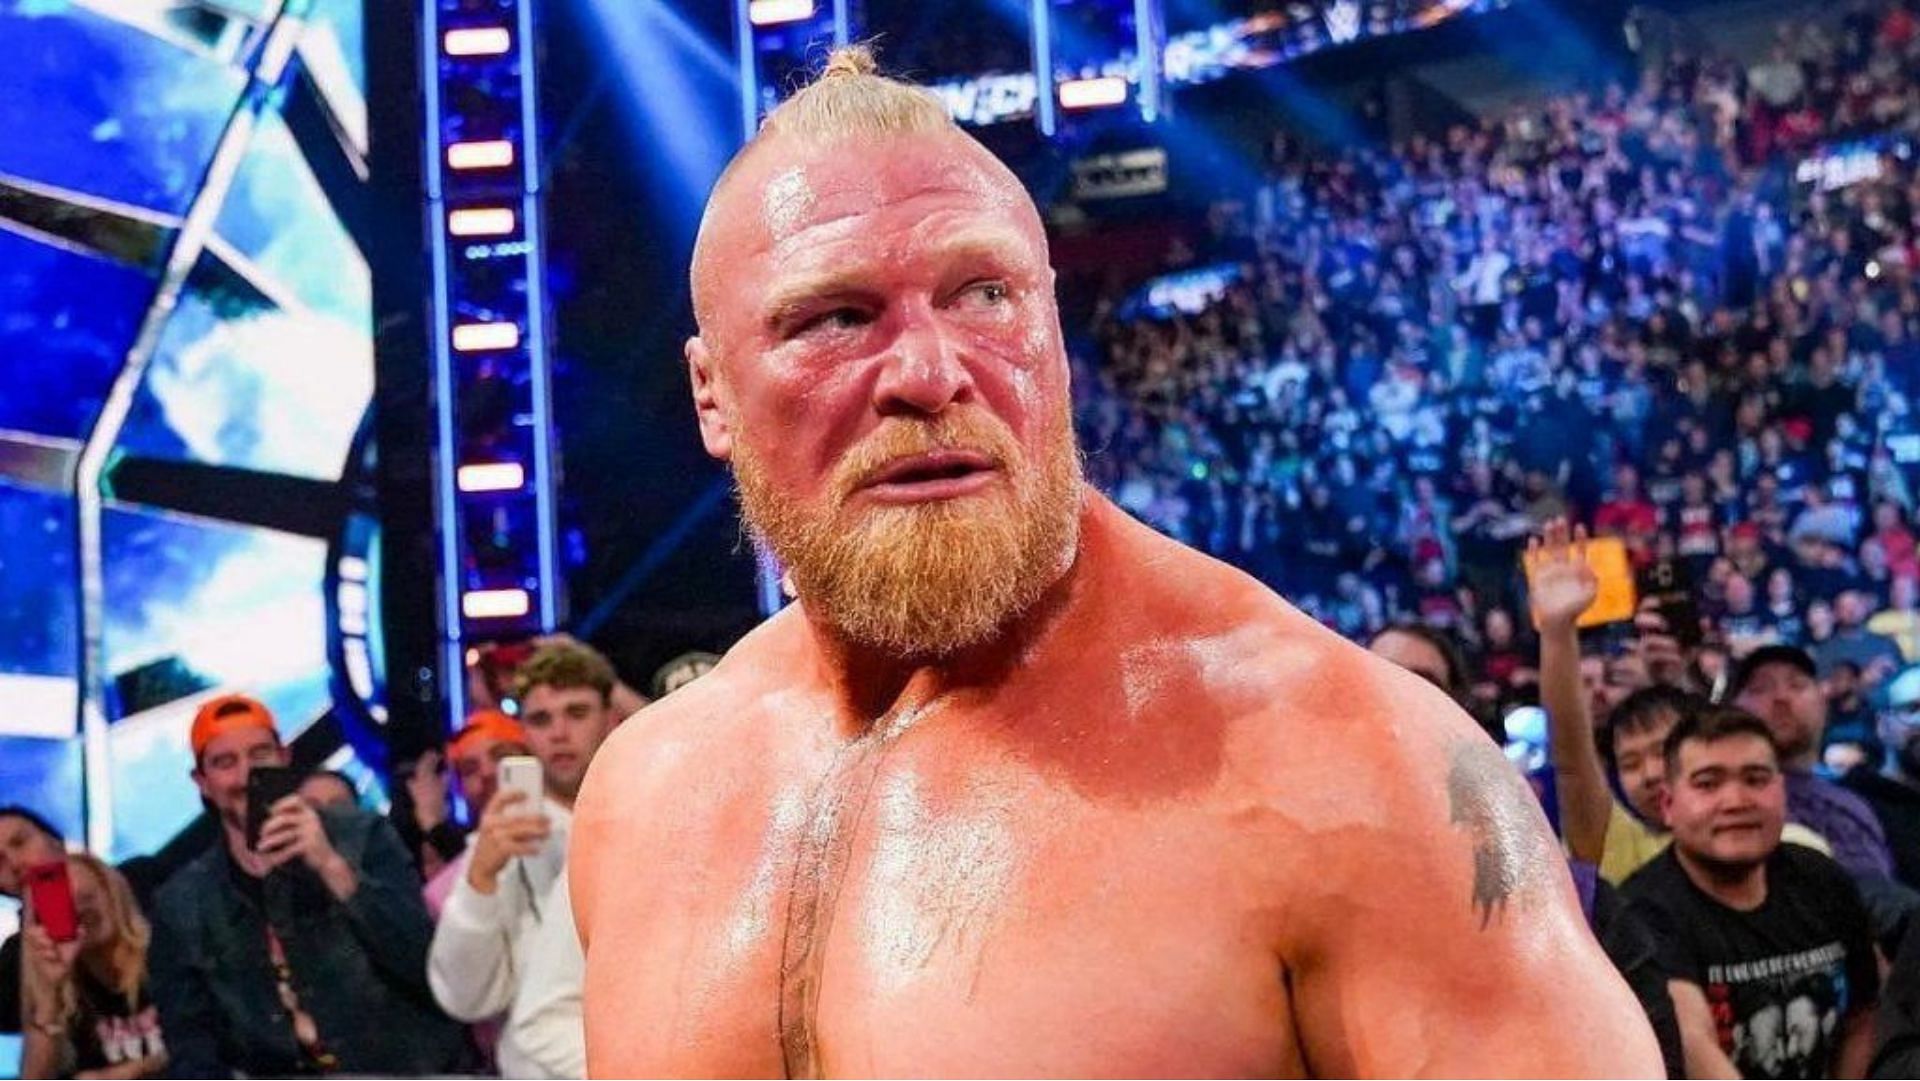 Brock Lesnar is not scheduled for MITB 2023.